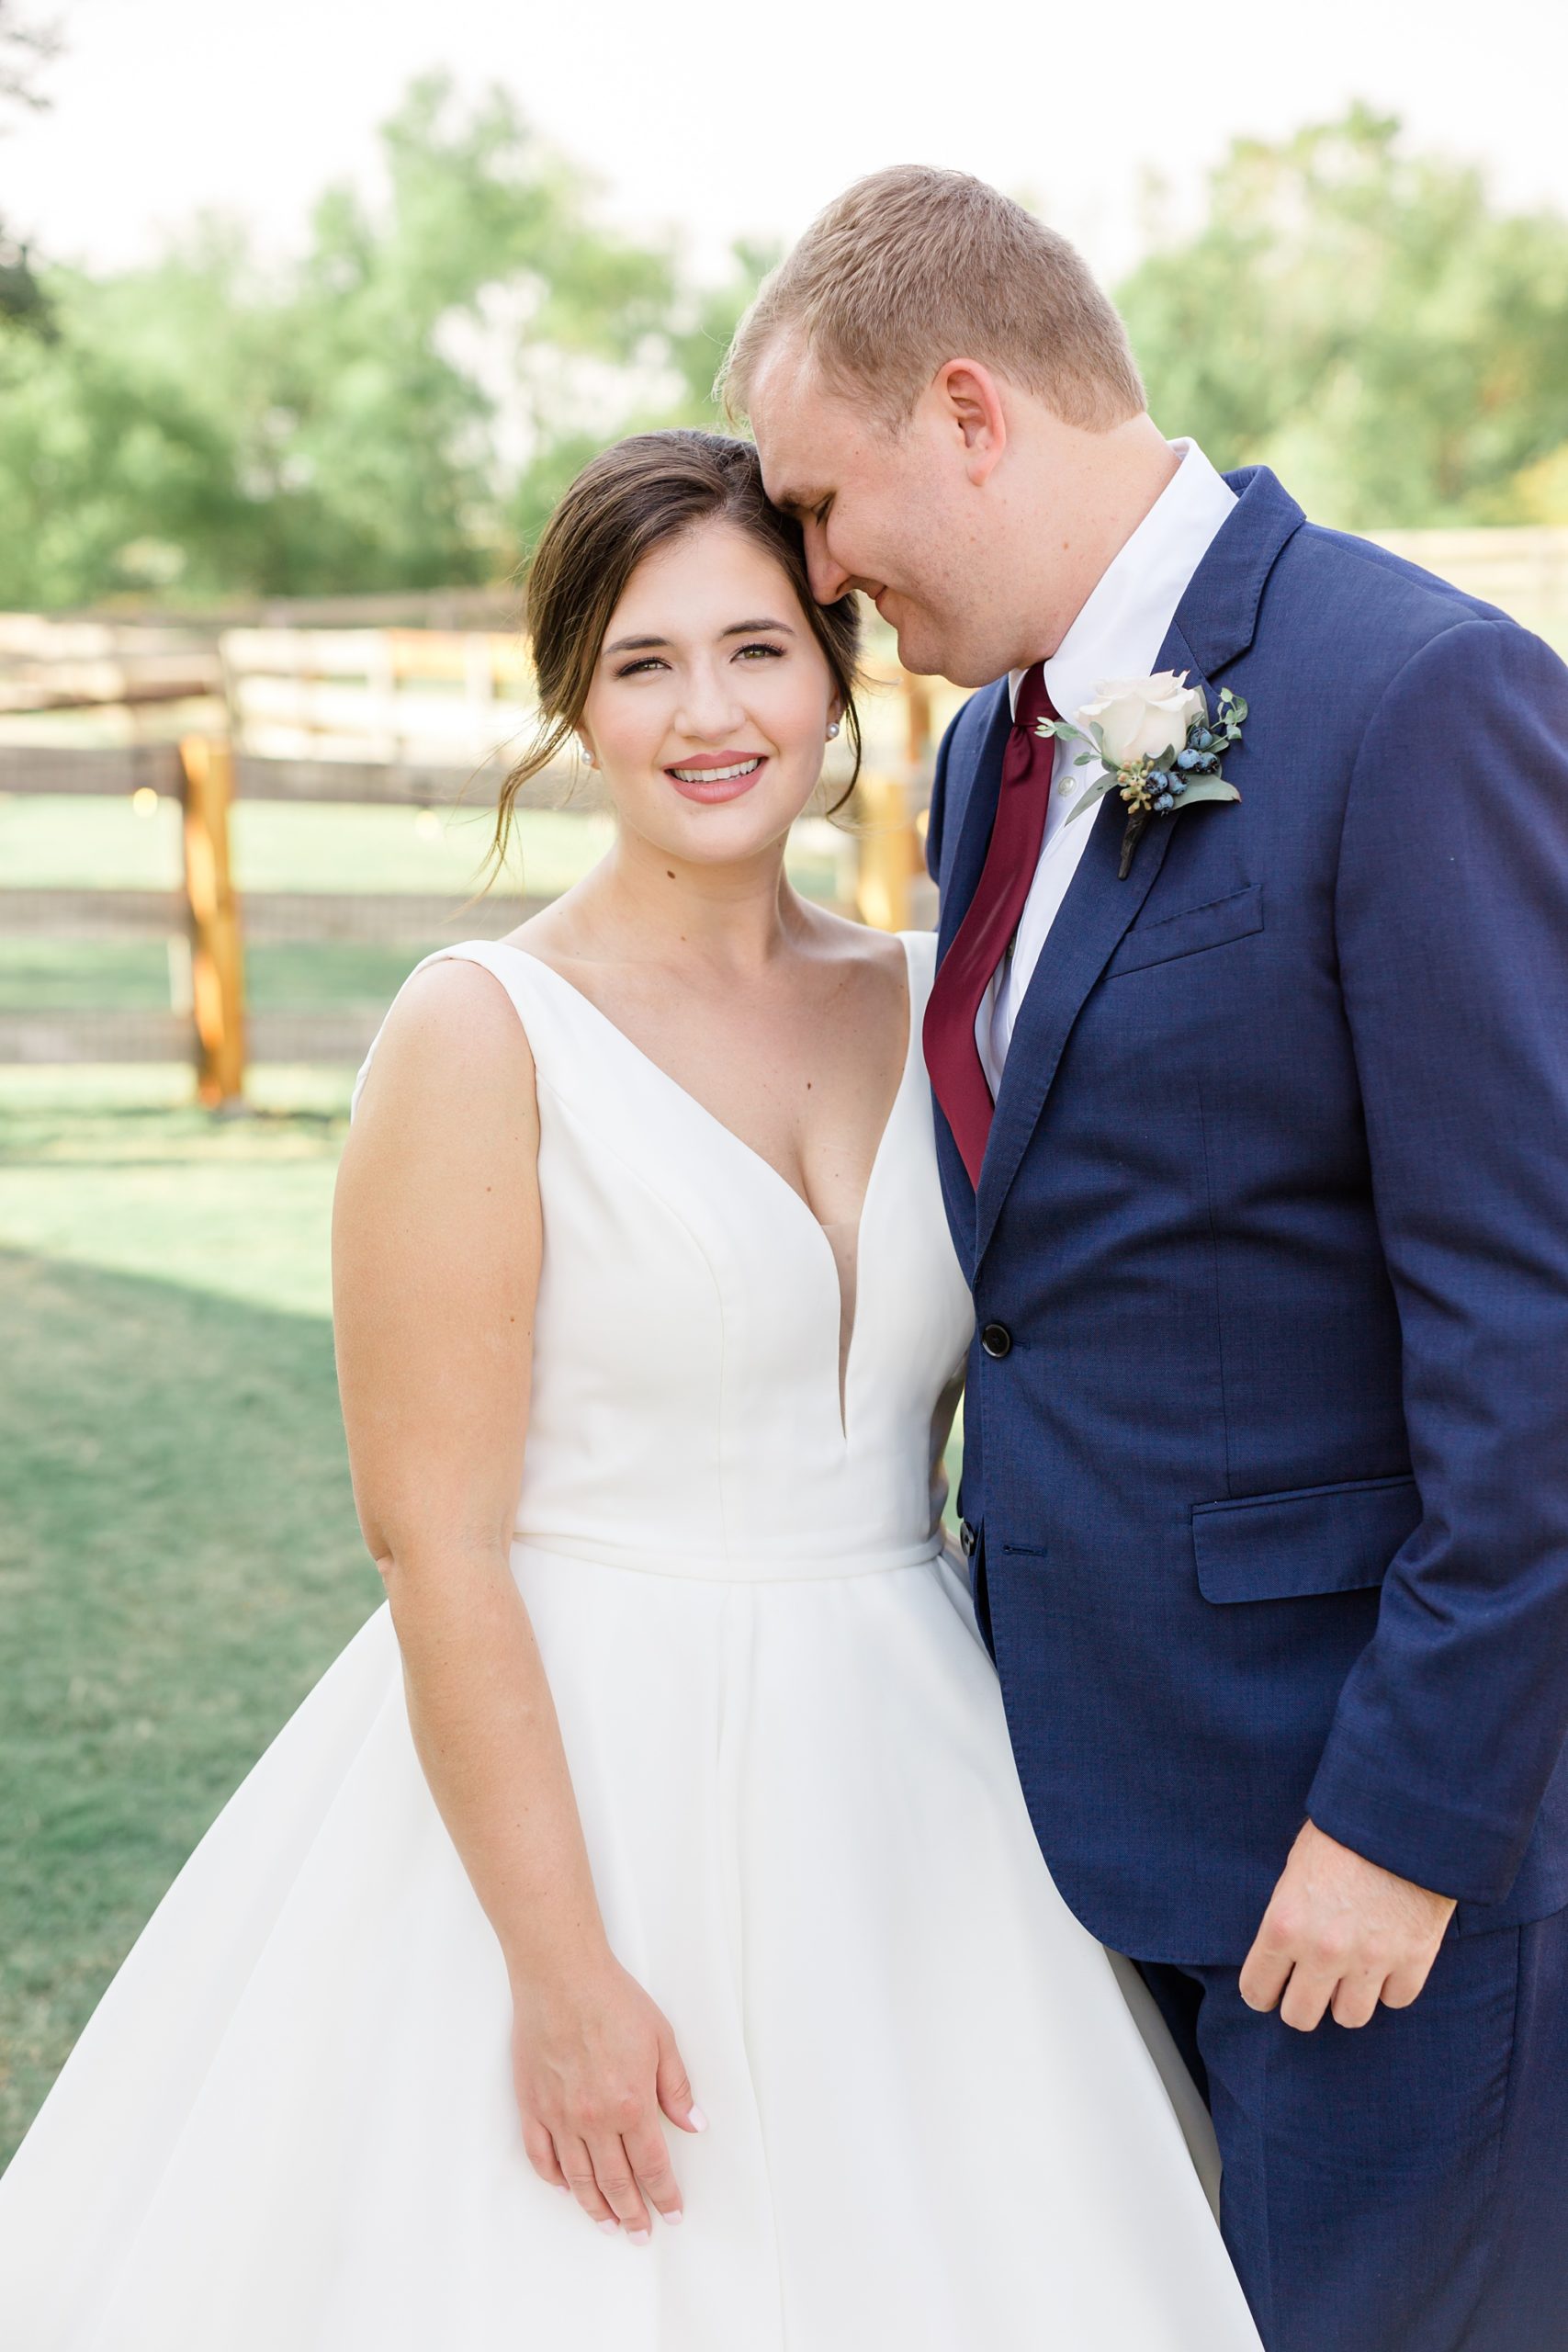 groom nuzzles bride's forehead during wedding photos